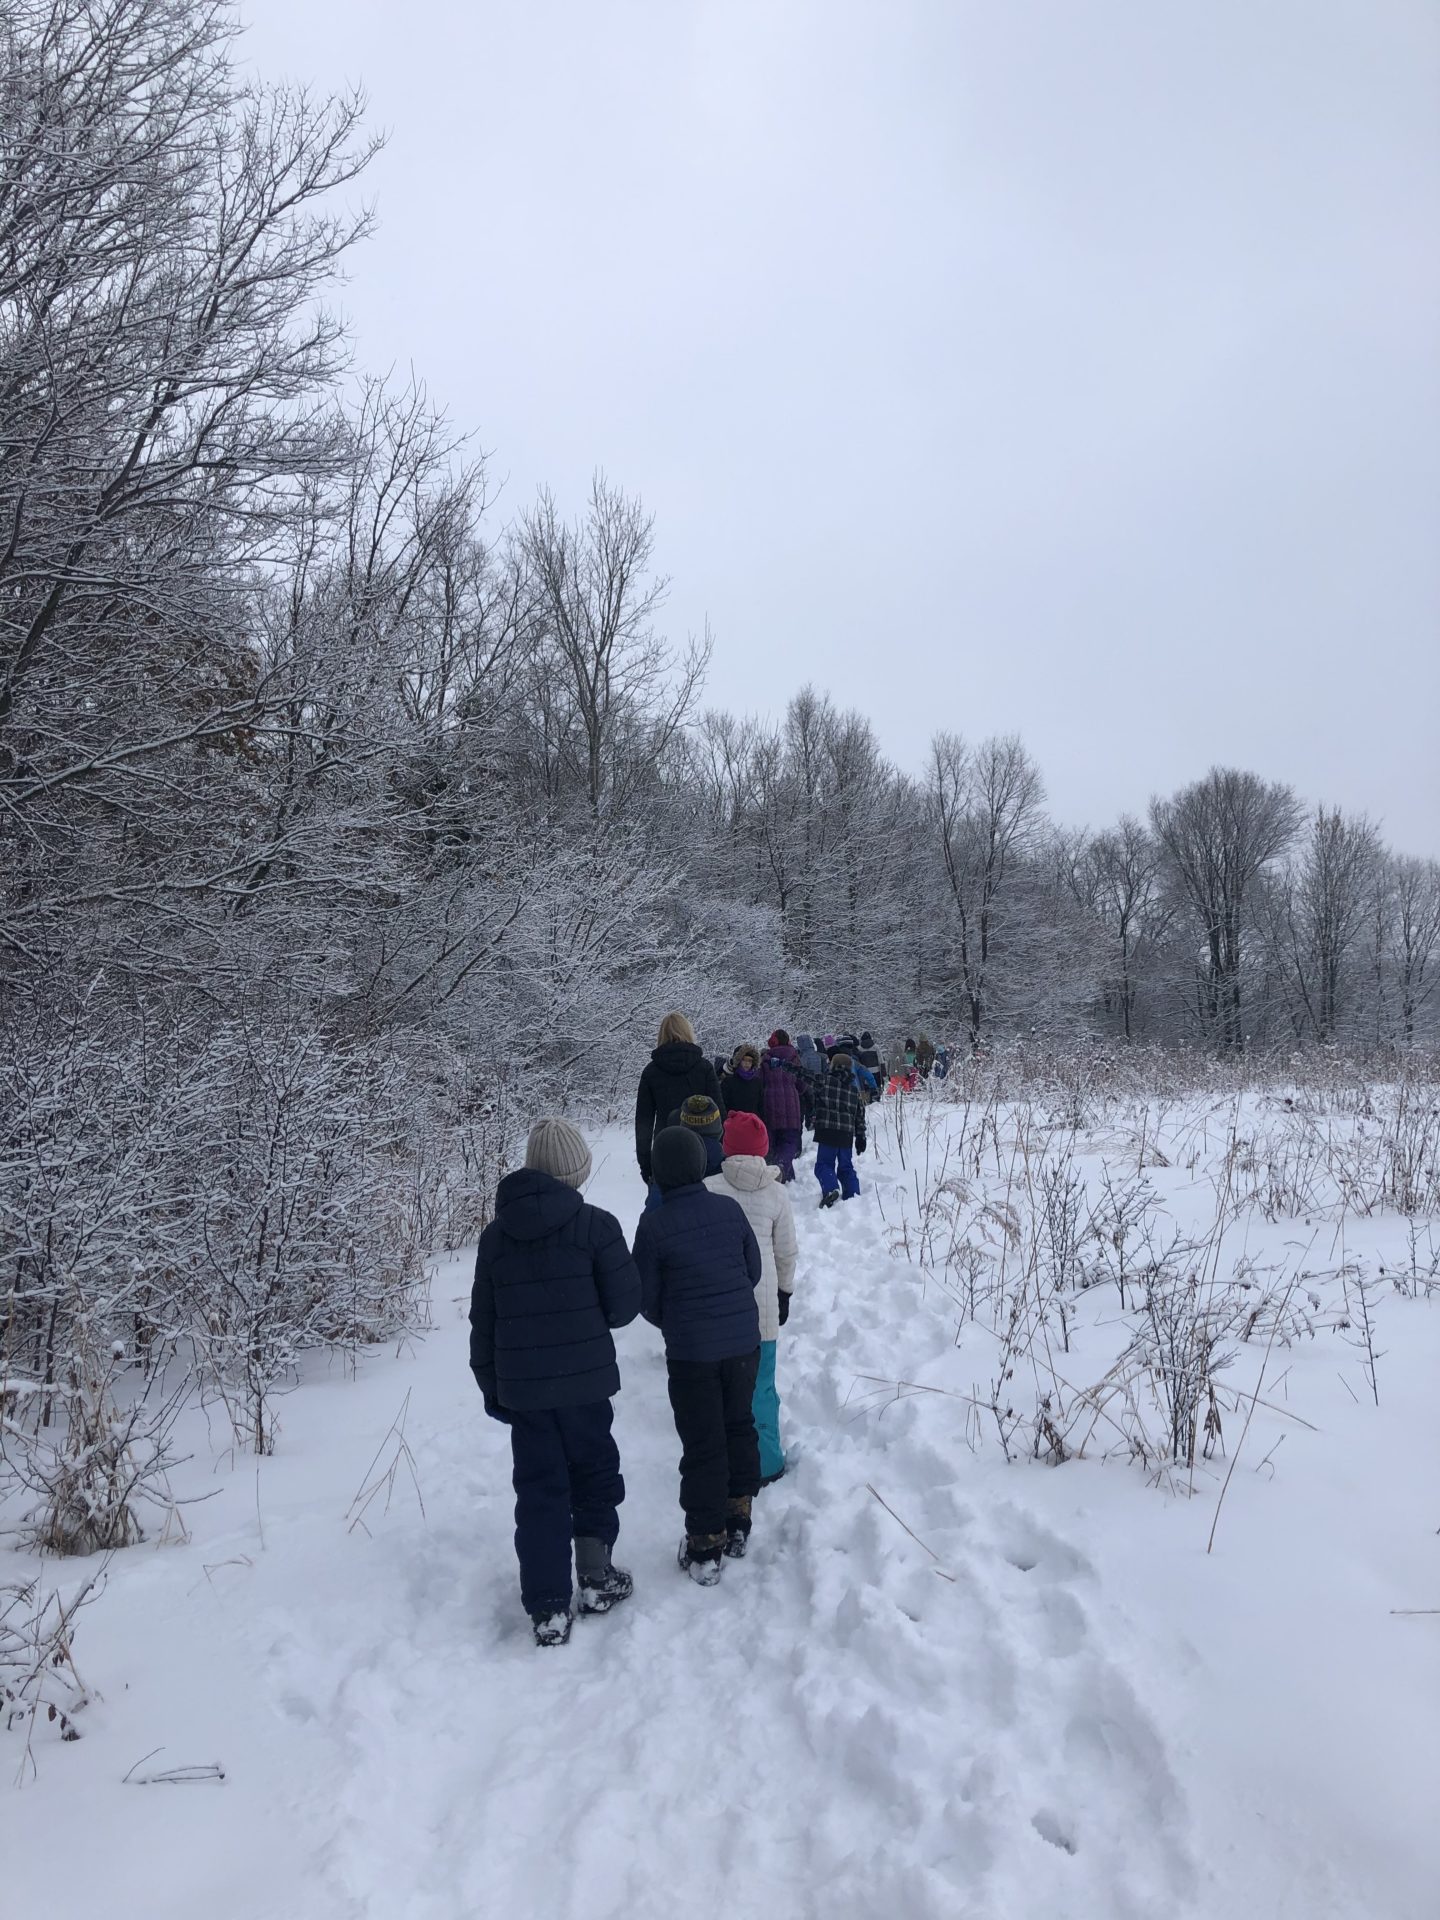 Students hiking in the snow.